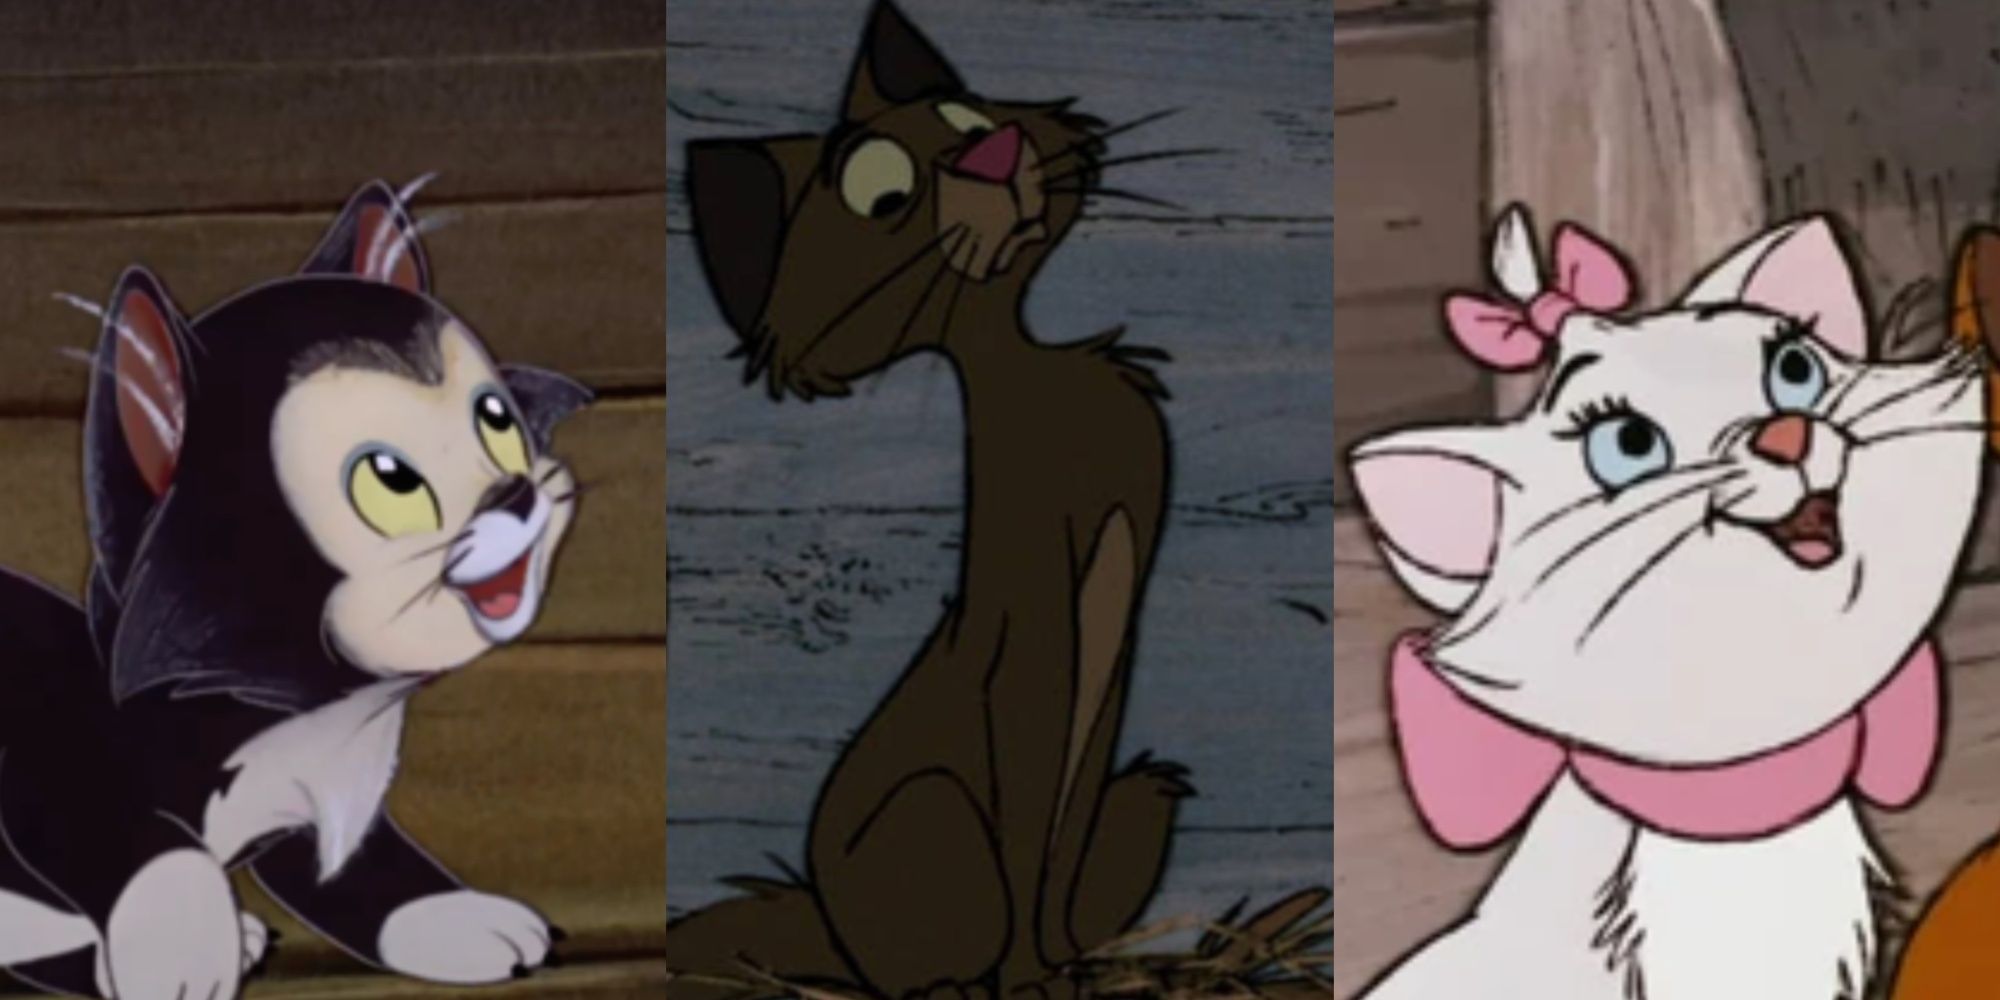 Split images of Figaro in Pinocchio, Sergeant Tibbs in One Hundred and One Dalmatians, and Marie in The Aristocats